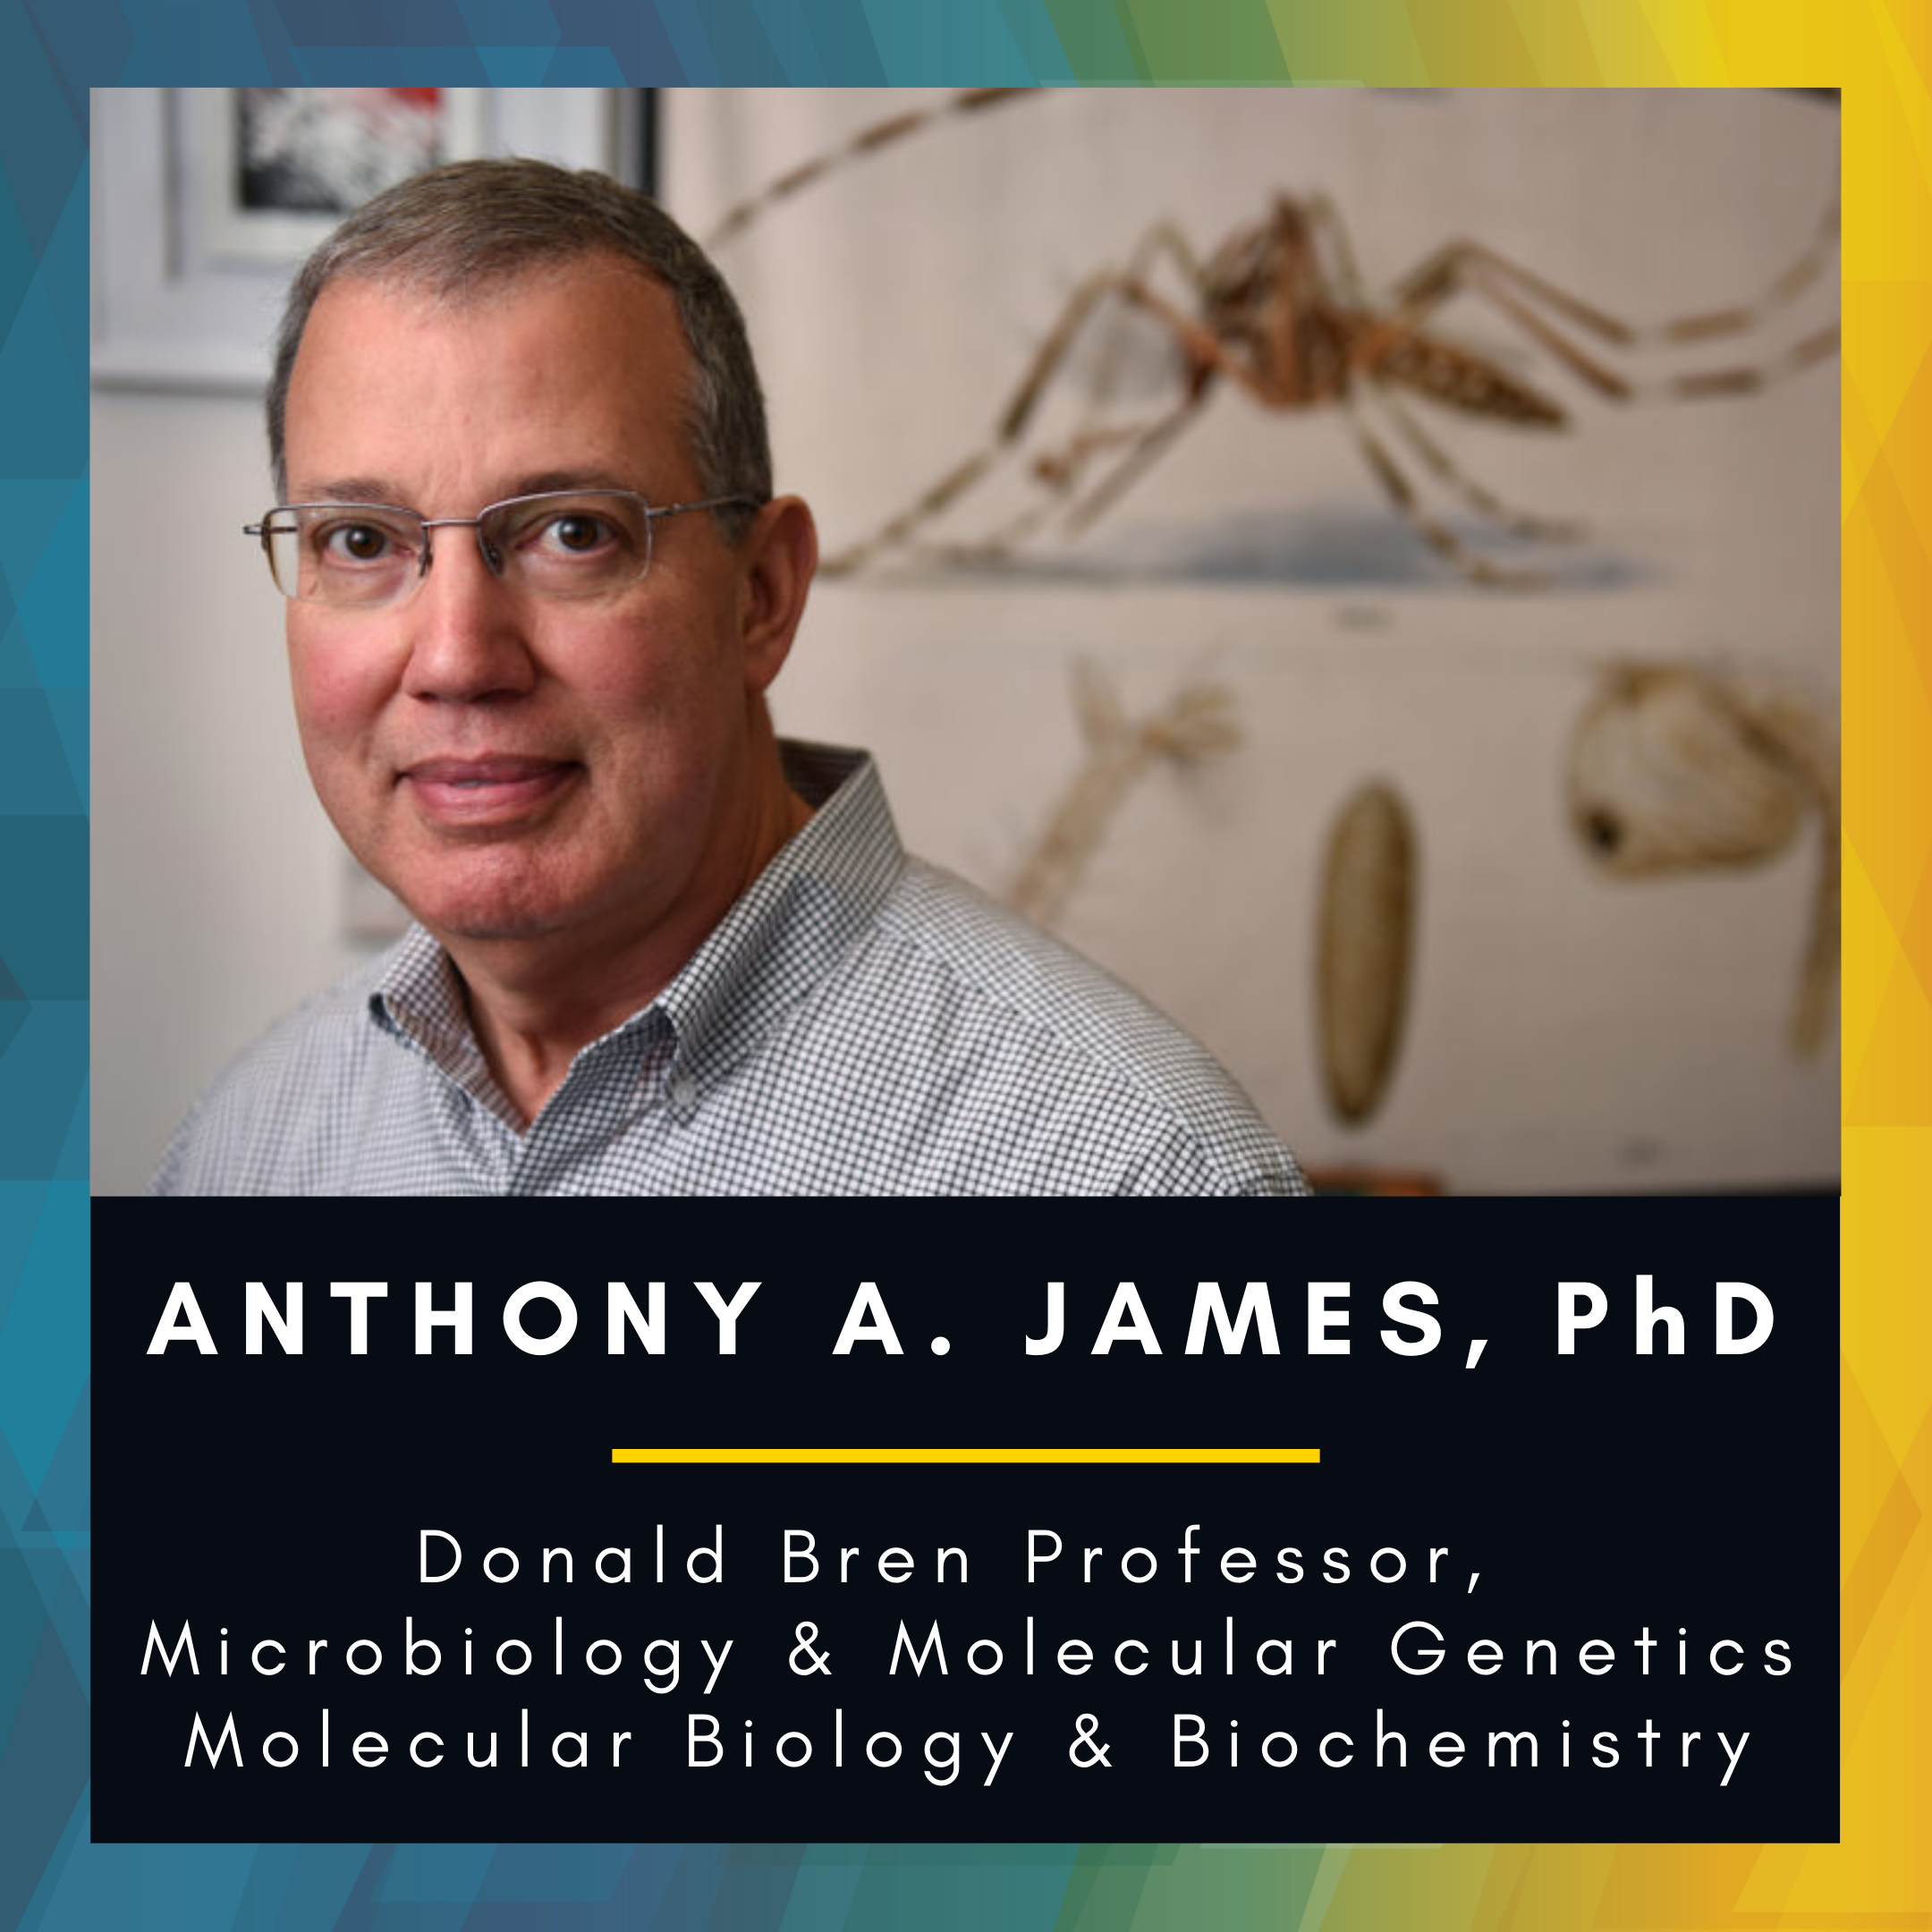 Headshot of Anthony A. James, PhD. with words Anthony A. James, PhD. Donald Bren Professor, Microbiology & Molecular Genetics Molecular Biology & Biochemistry below the picture